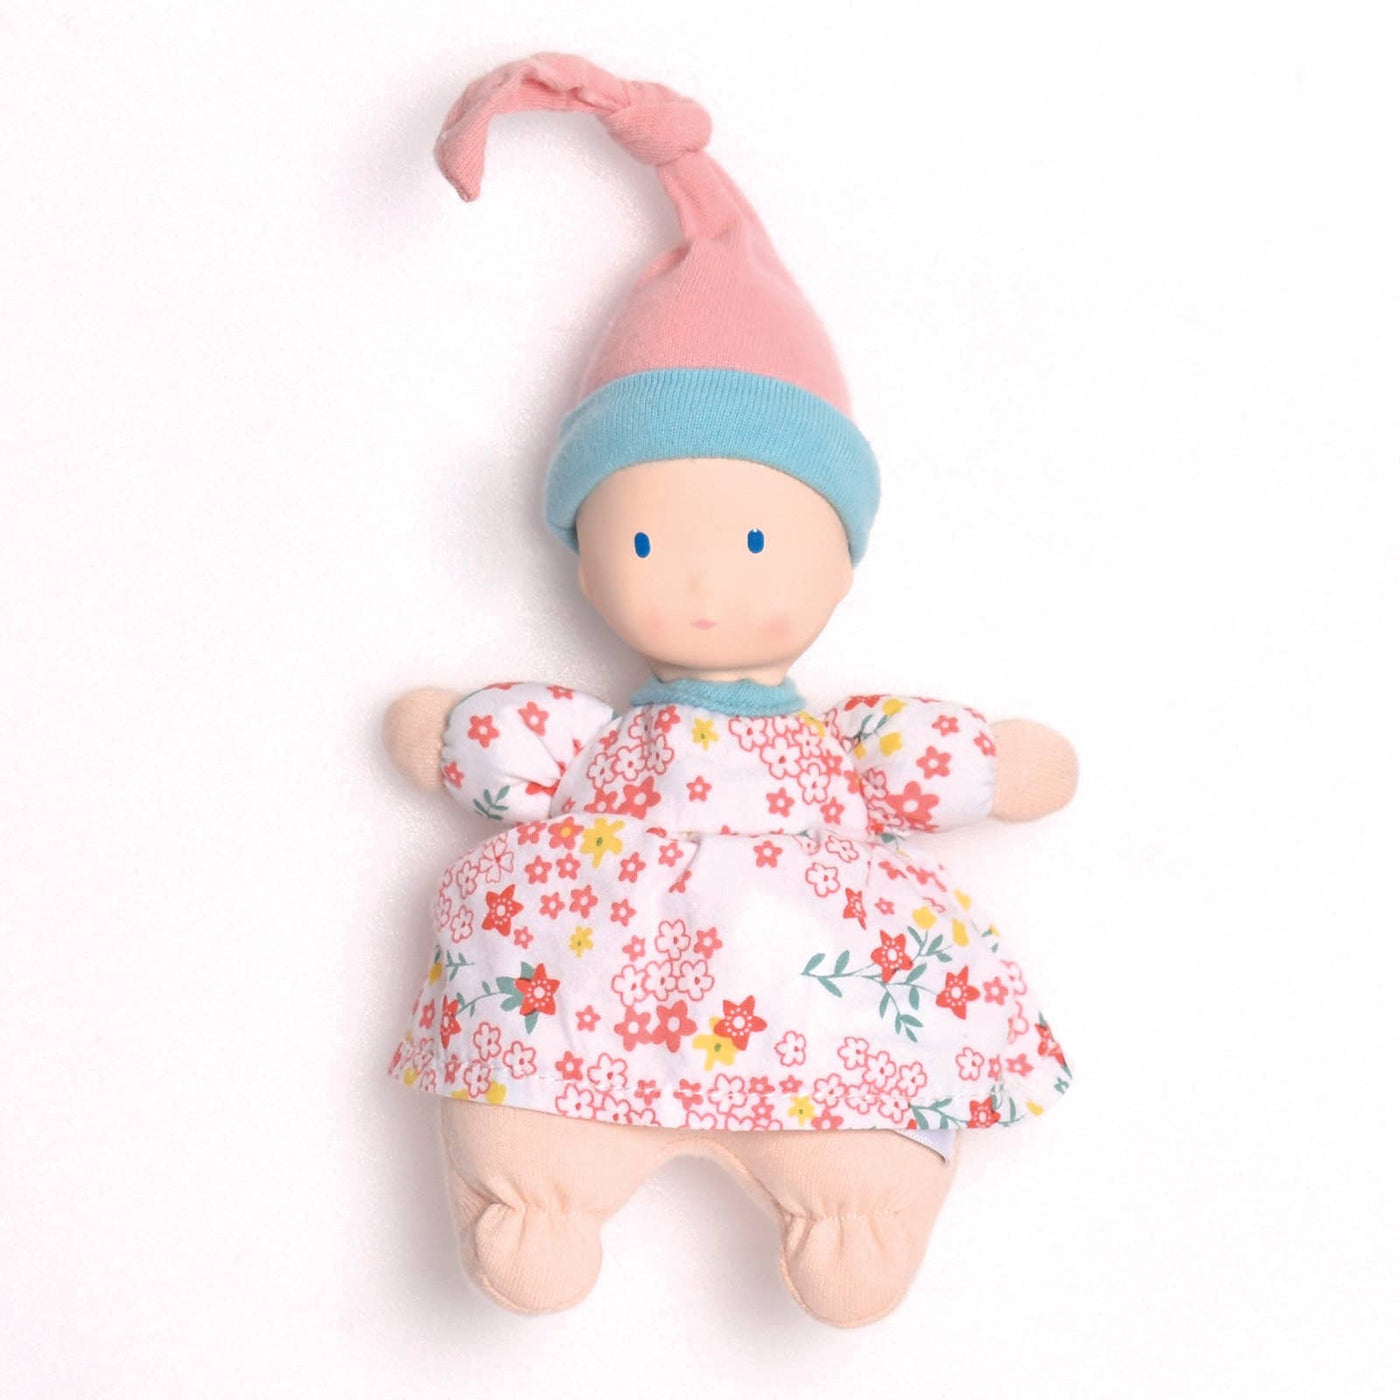 Rubber Head Doll-Floral Dress